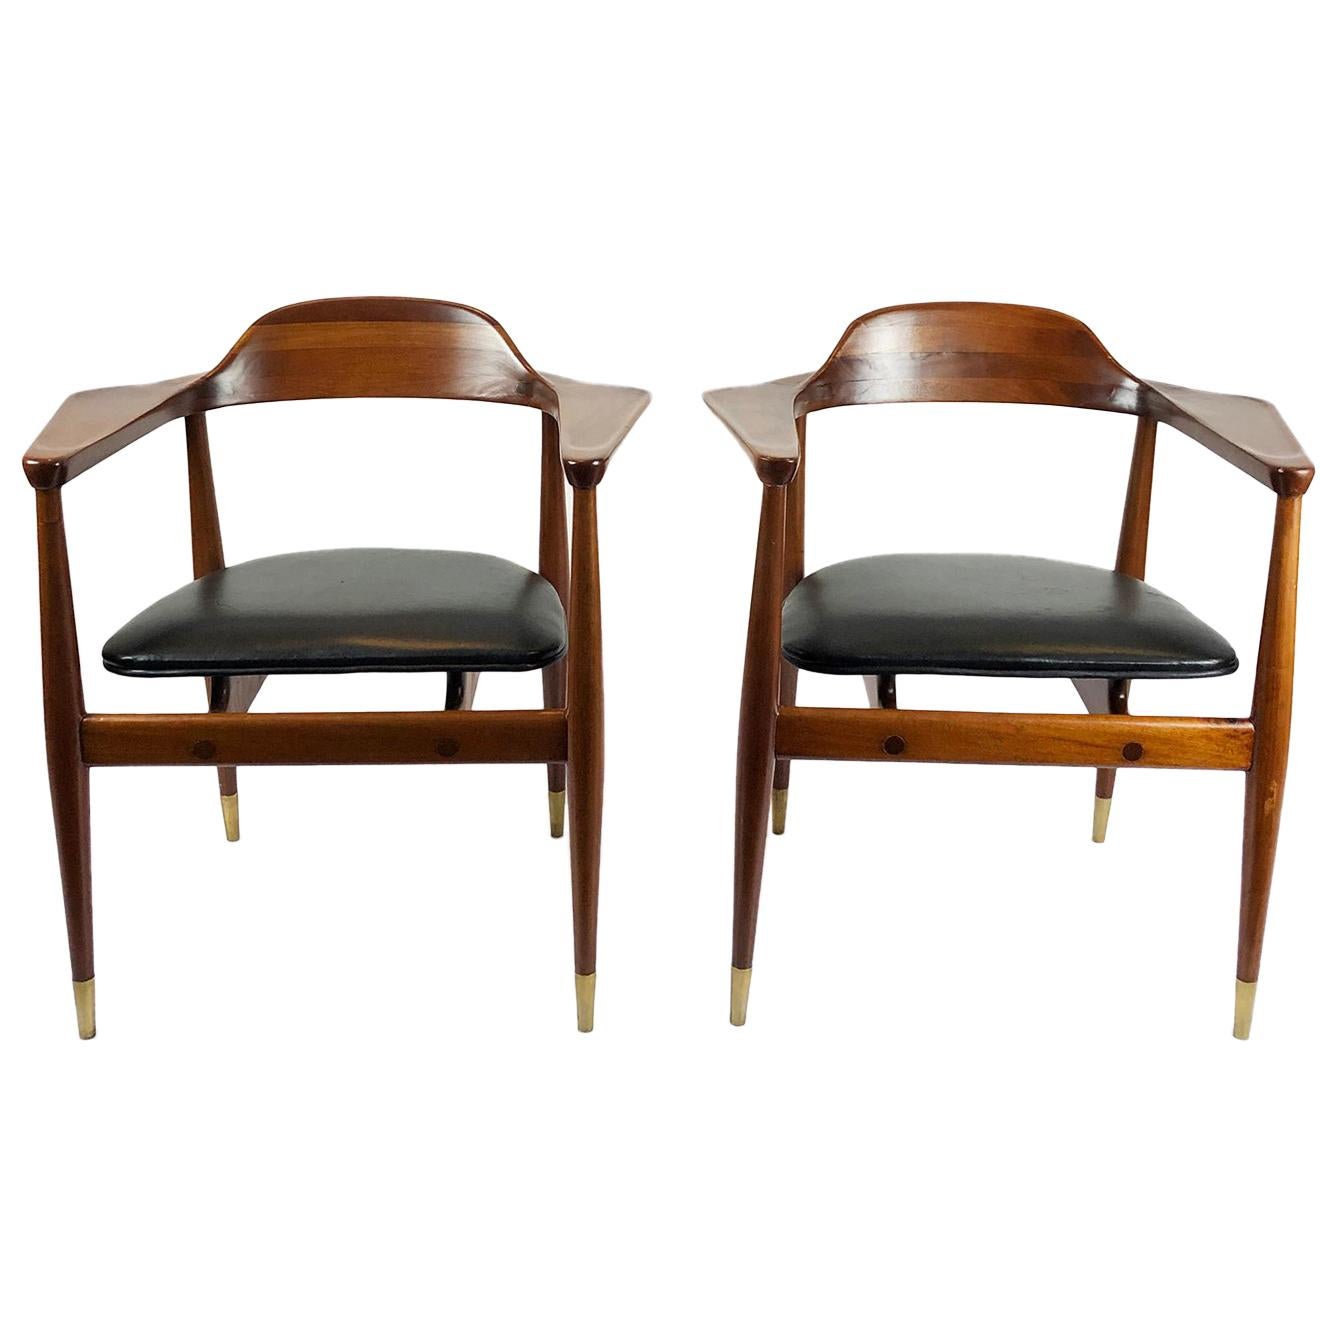 Pair of armchairs by Charles Allen